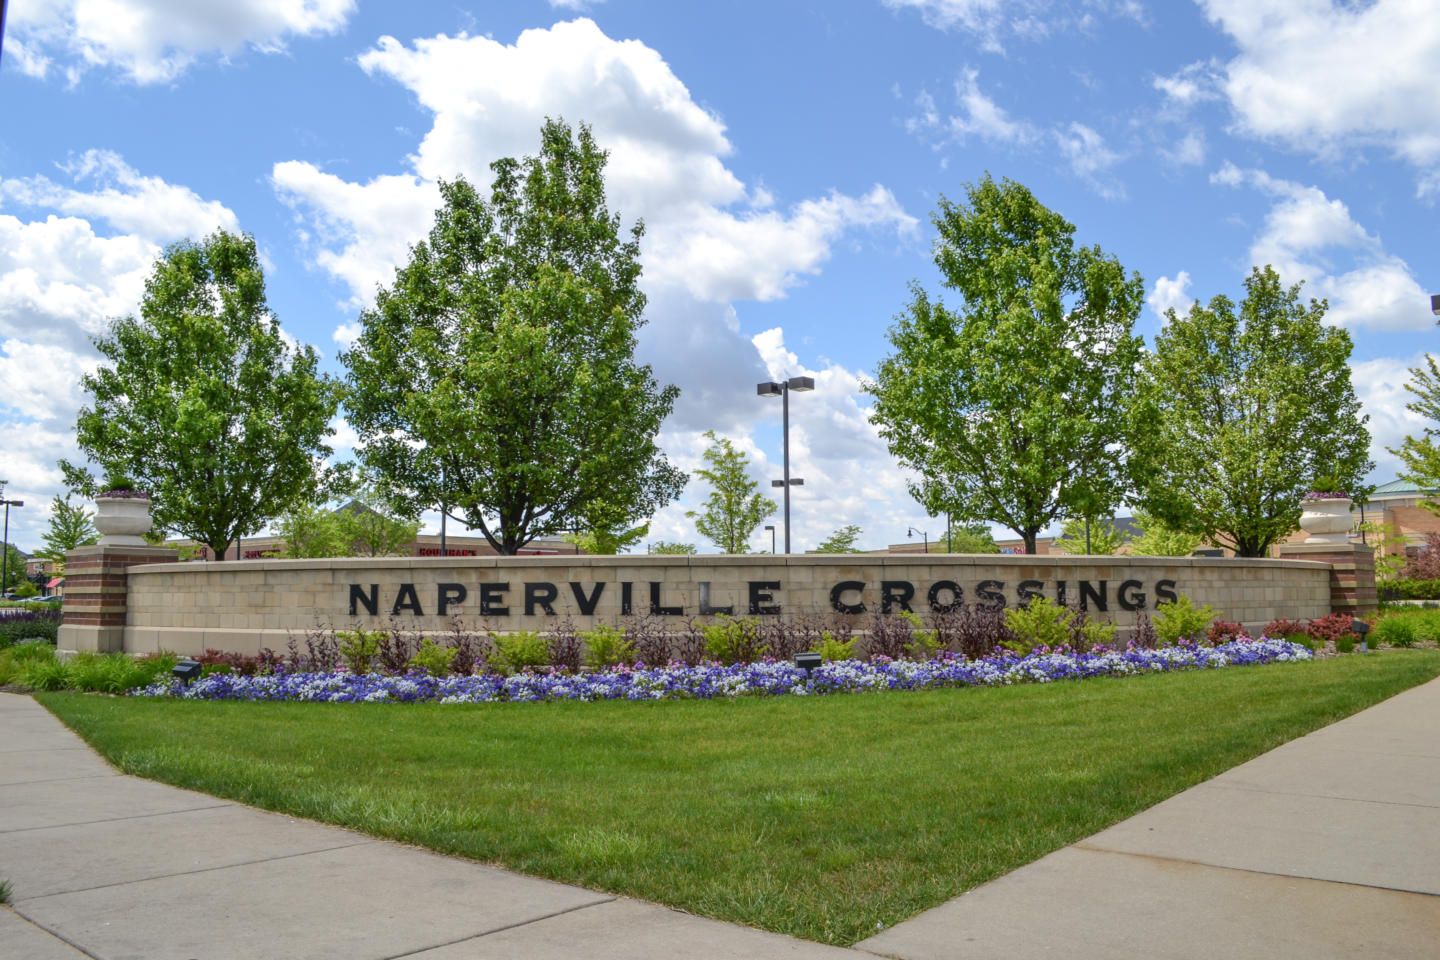 Naperville Crossings signage